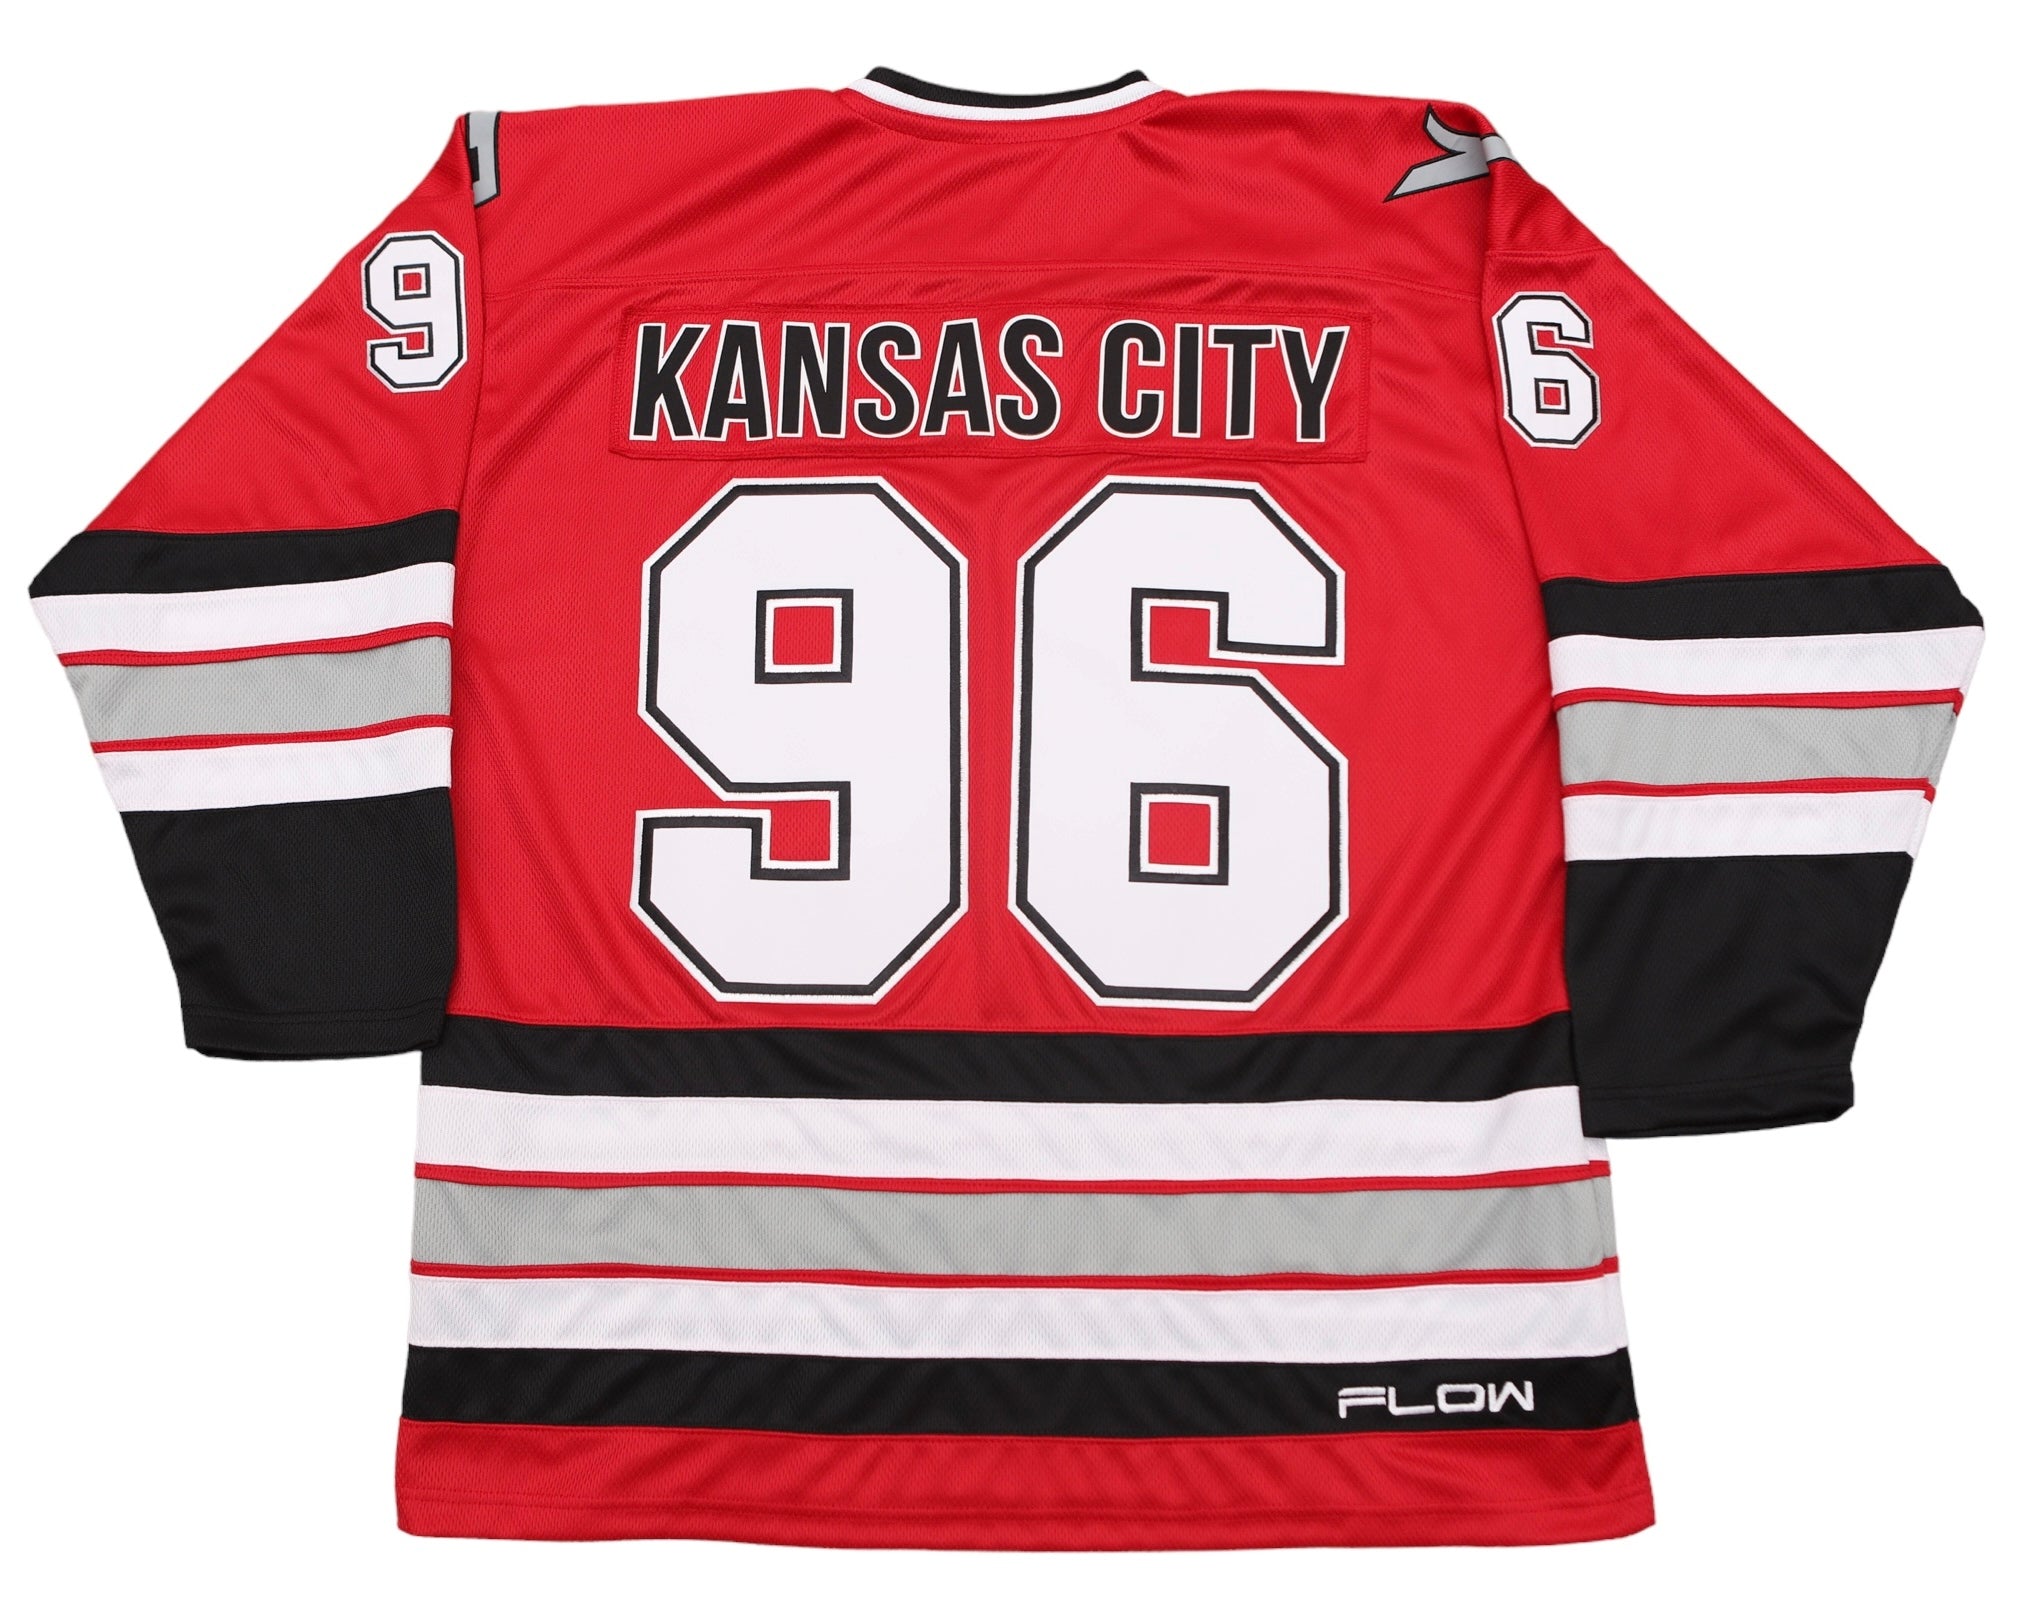 Custom Hockey Jerseys With Kings Embroidered Twill Crest We 